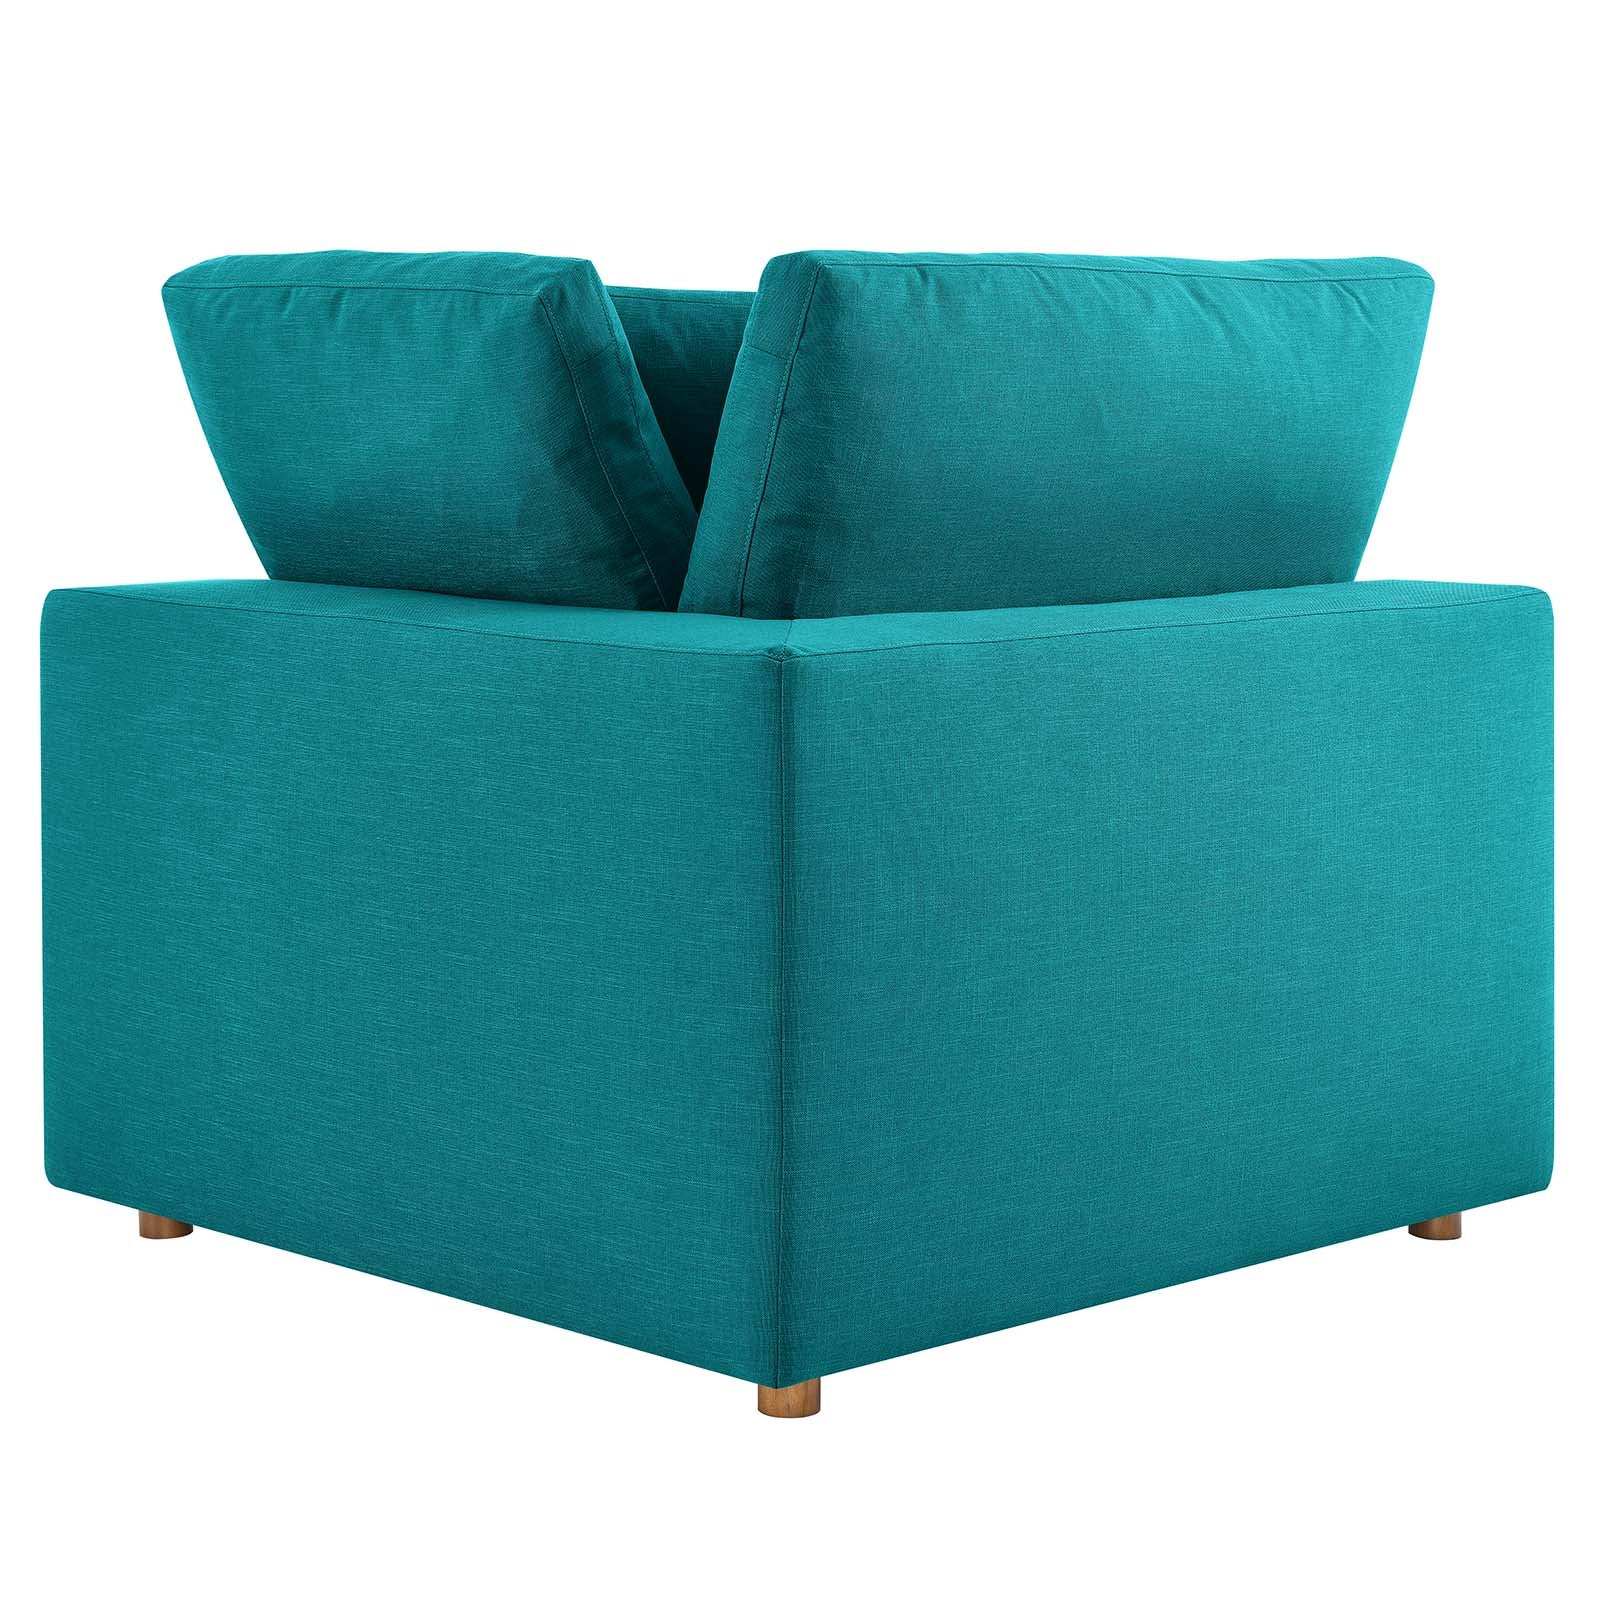 Modway Living Room Sets - Commix Down Filled Overstuffed Corner Chair Teal